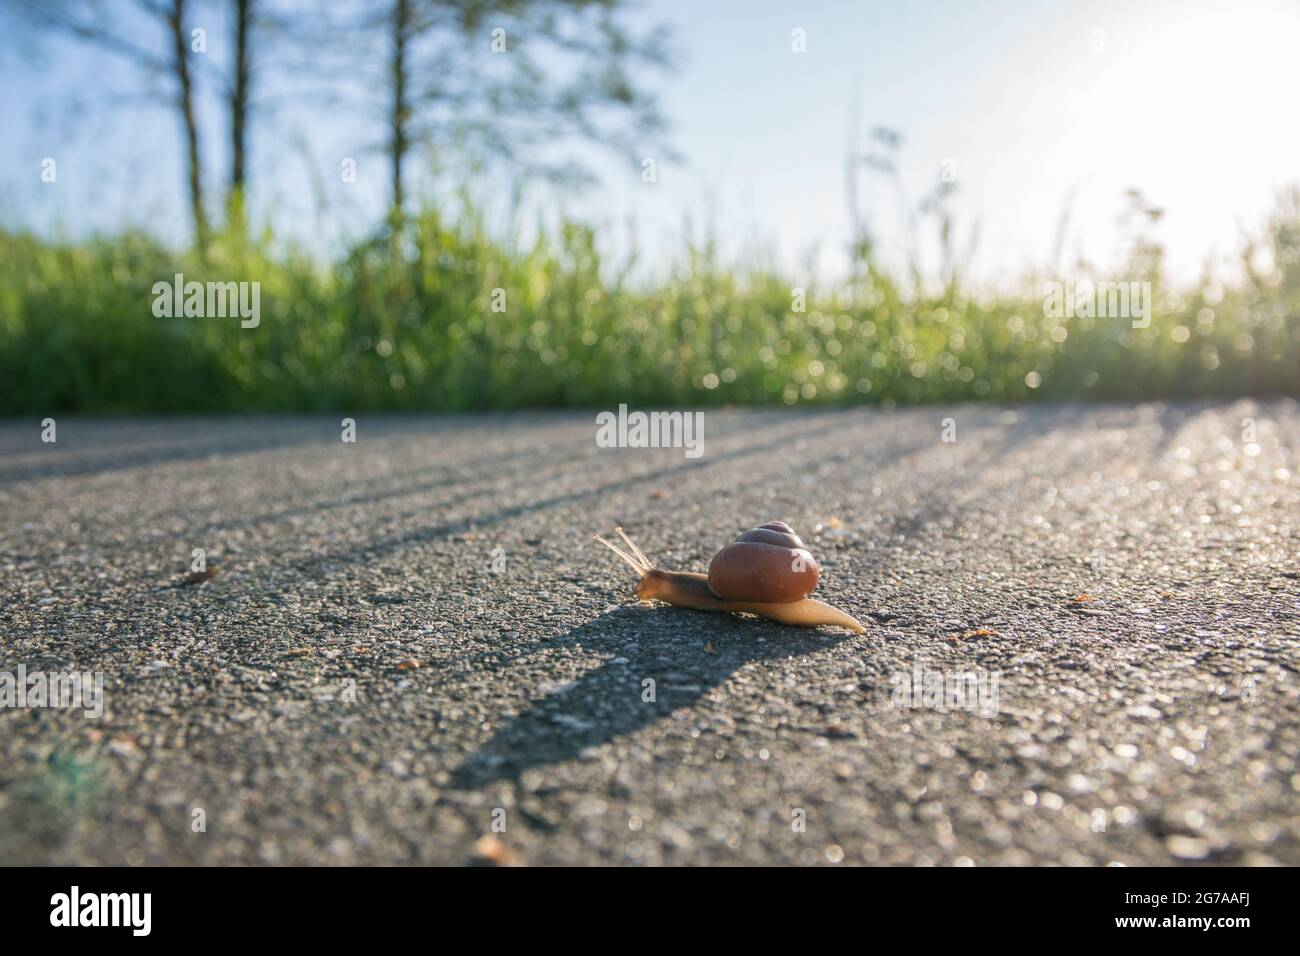 A snail on a pedestrian path on its way into the grass. Stock Photo